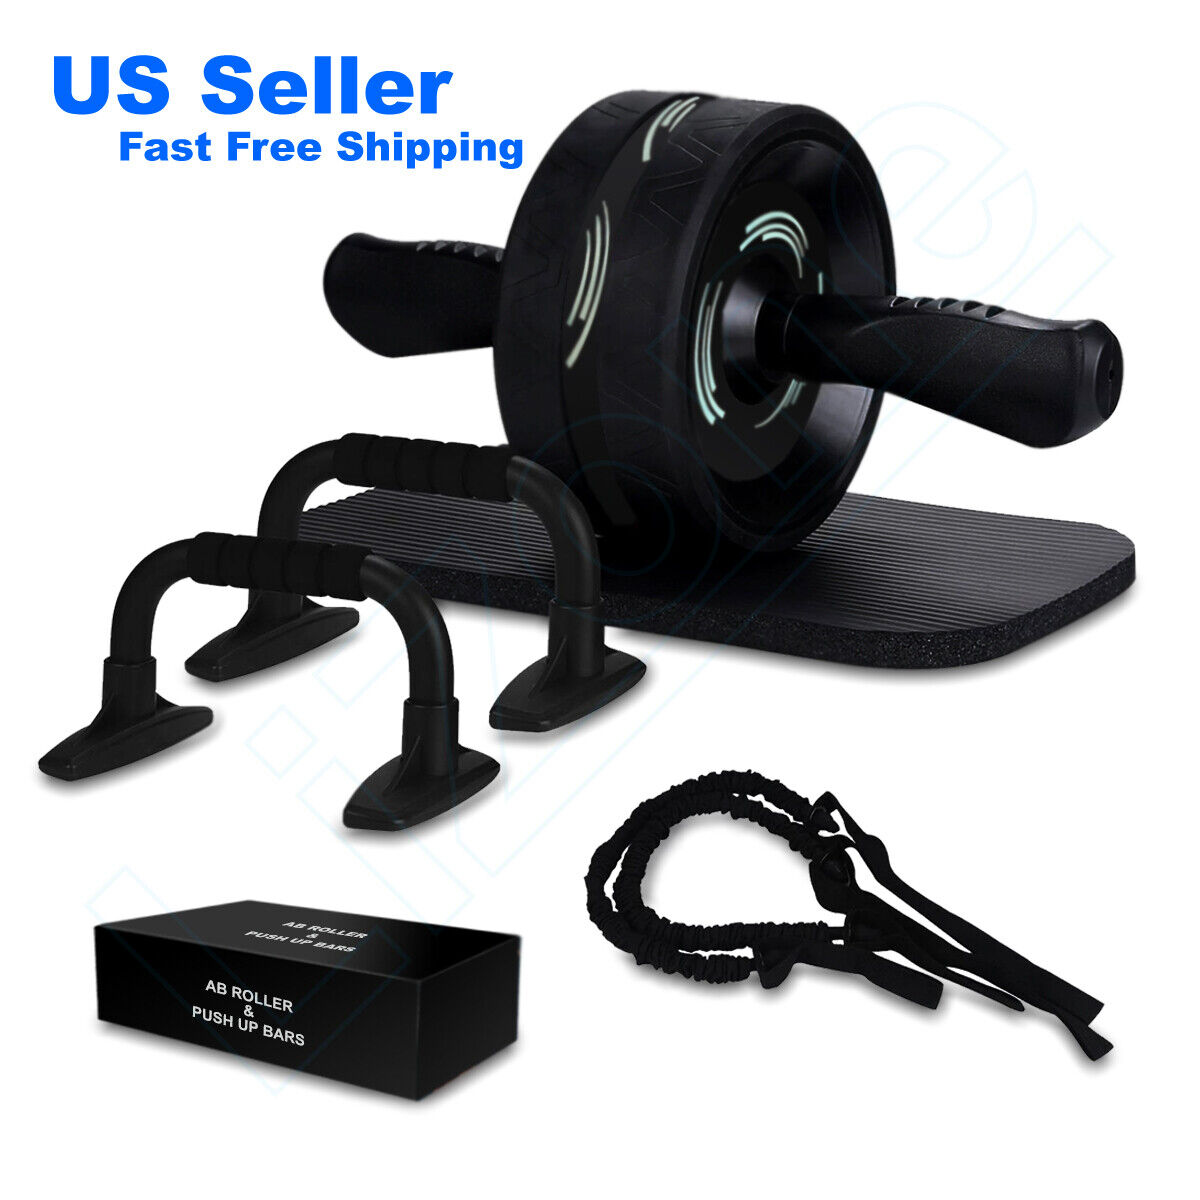 6-IN-1 Ab Roller Exercise Wheel Home Gym Workout Equipment Abdominal Fitness Lizone Does Not Apply